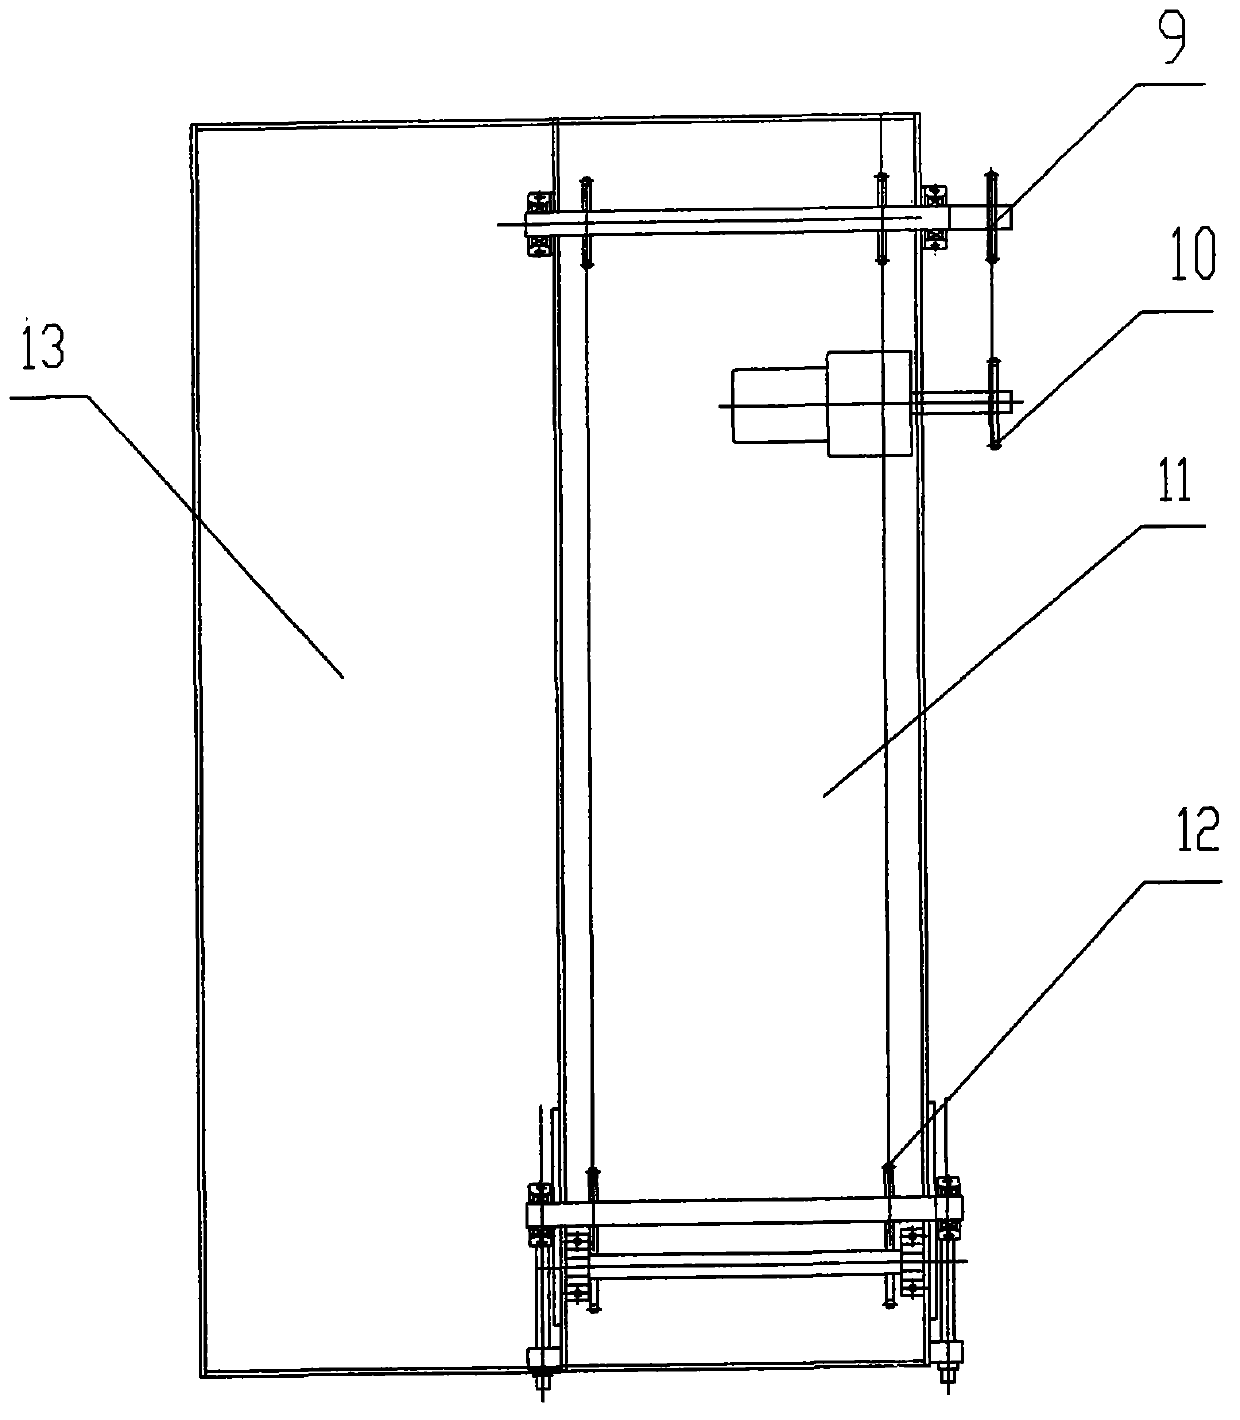 Filtering apparatus for edible oil pre-squeezing technology